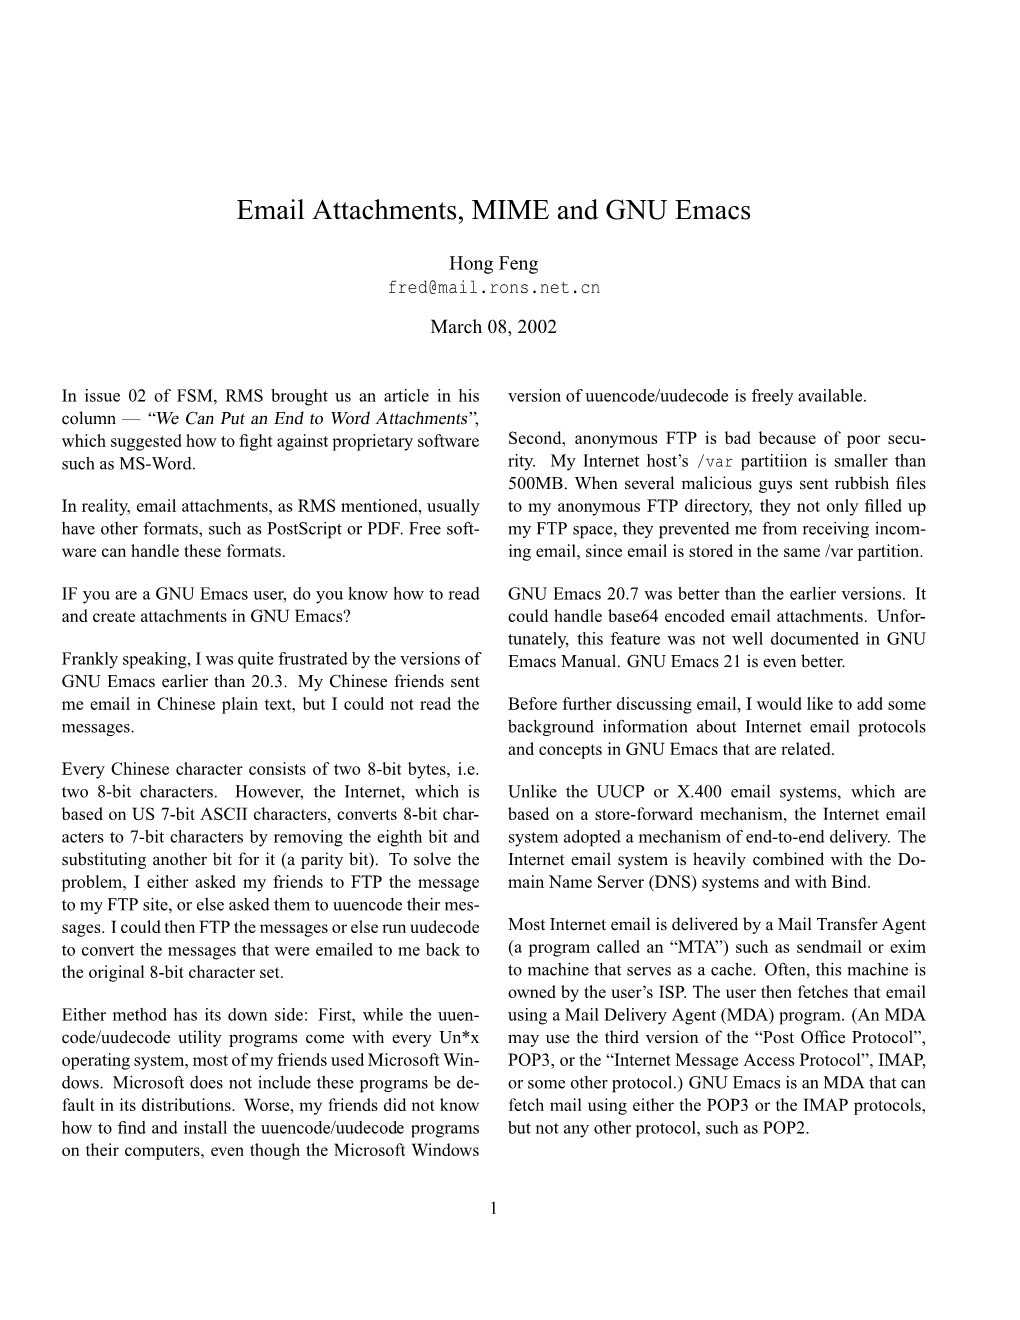 Email Attachments, MIME and GNU Emacs